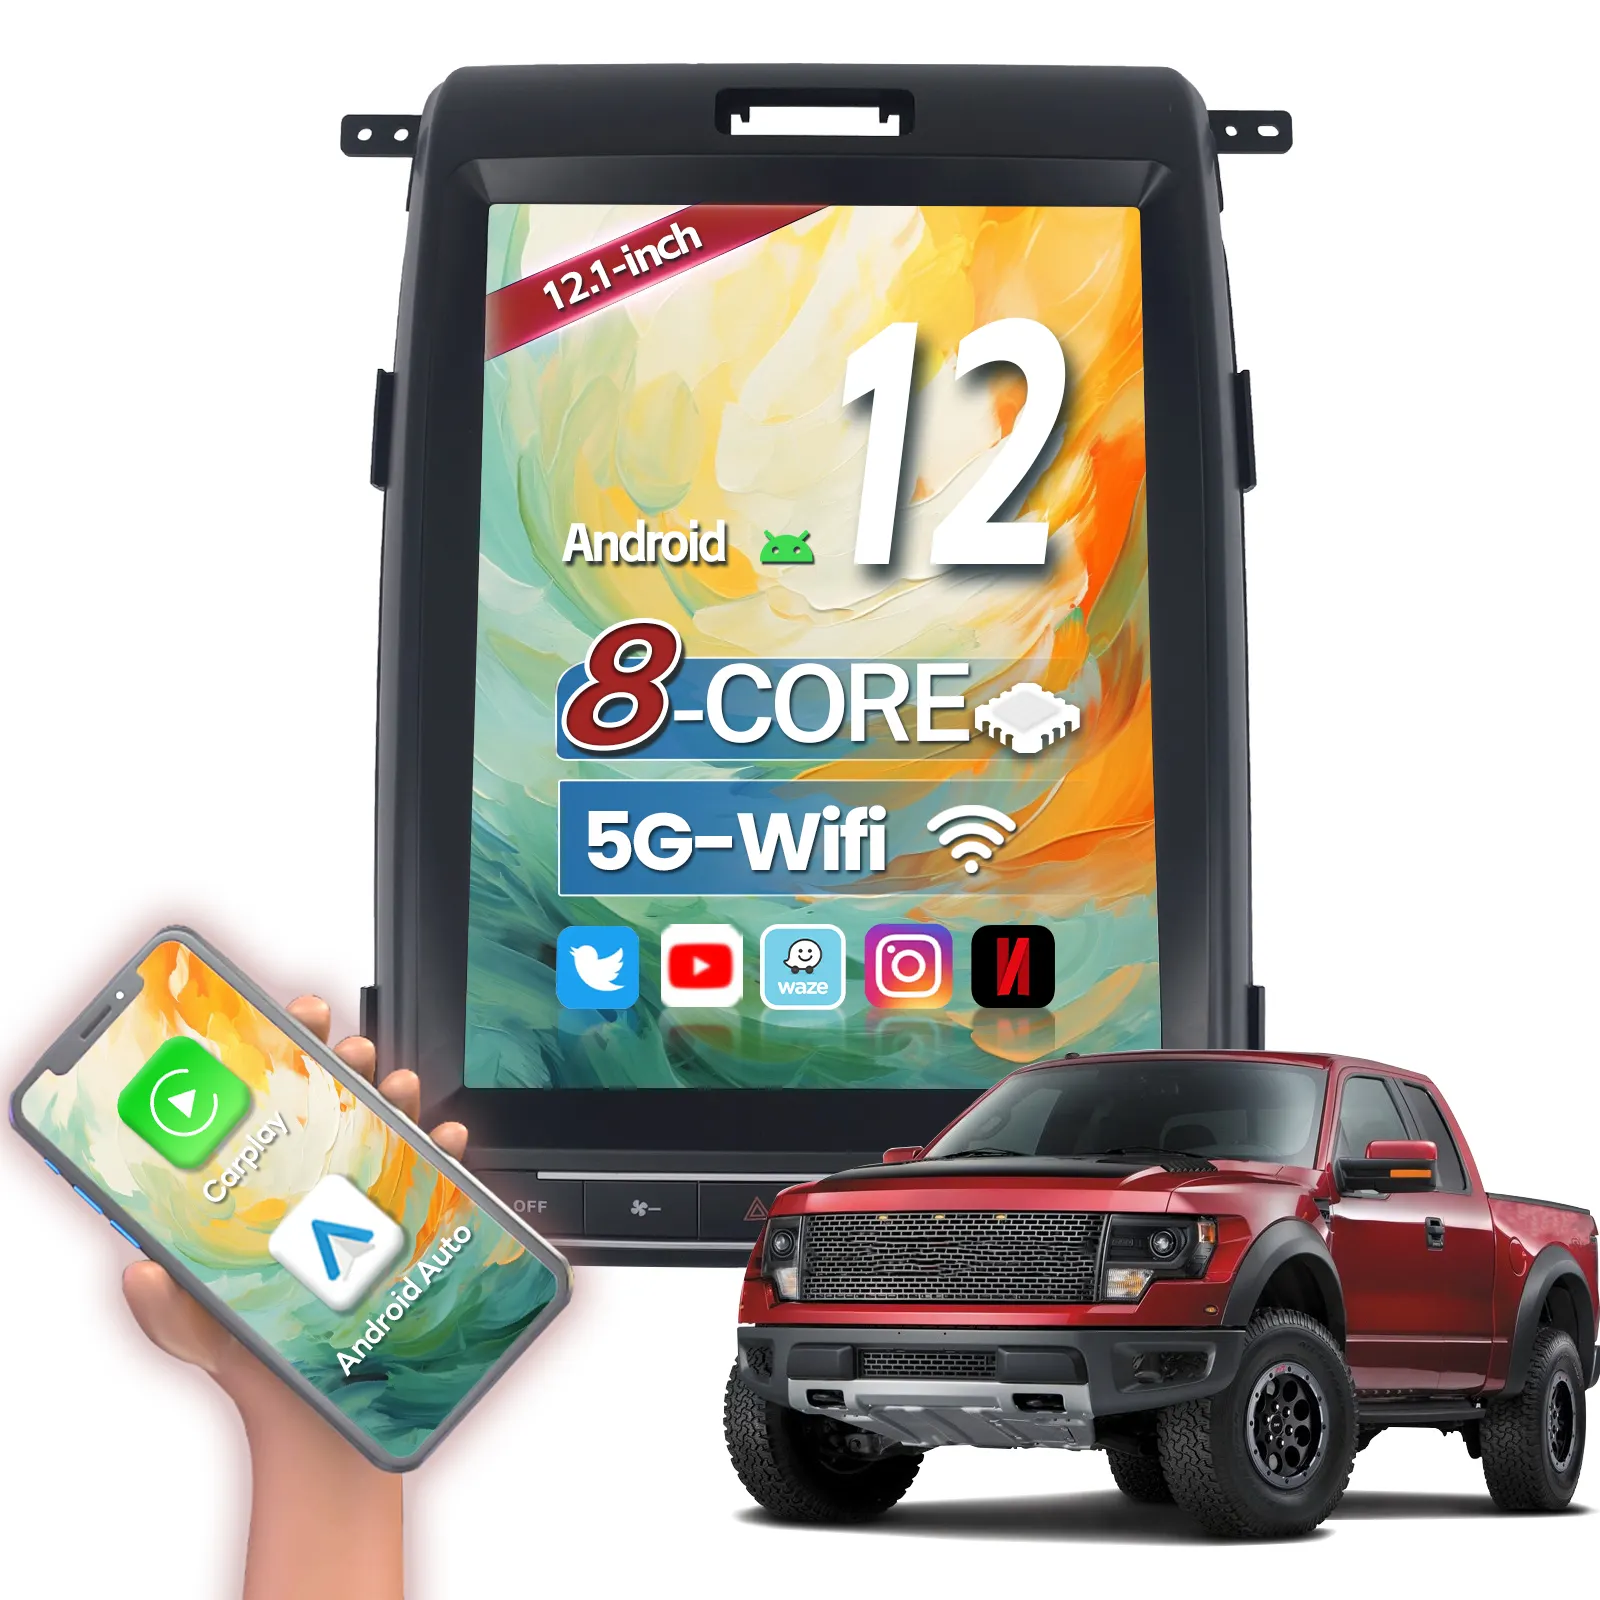 Ford F150 Radio mobil 12.1 inci, 13-14 Stereo 8 Core Android 12 navigasi GPS mobil untuk Ford F150 13-14 5G Wifi Radio